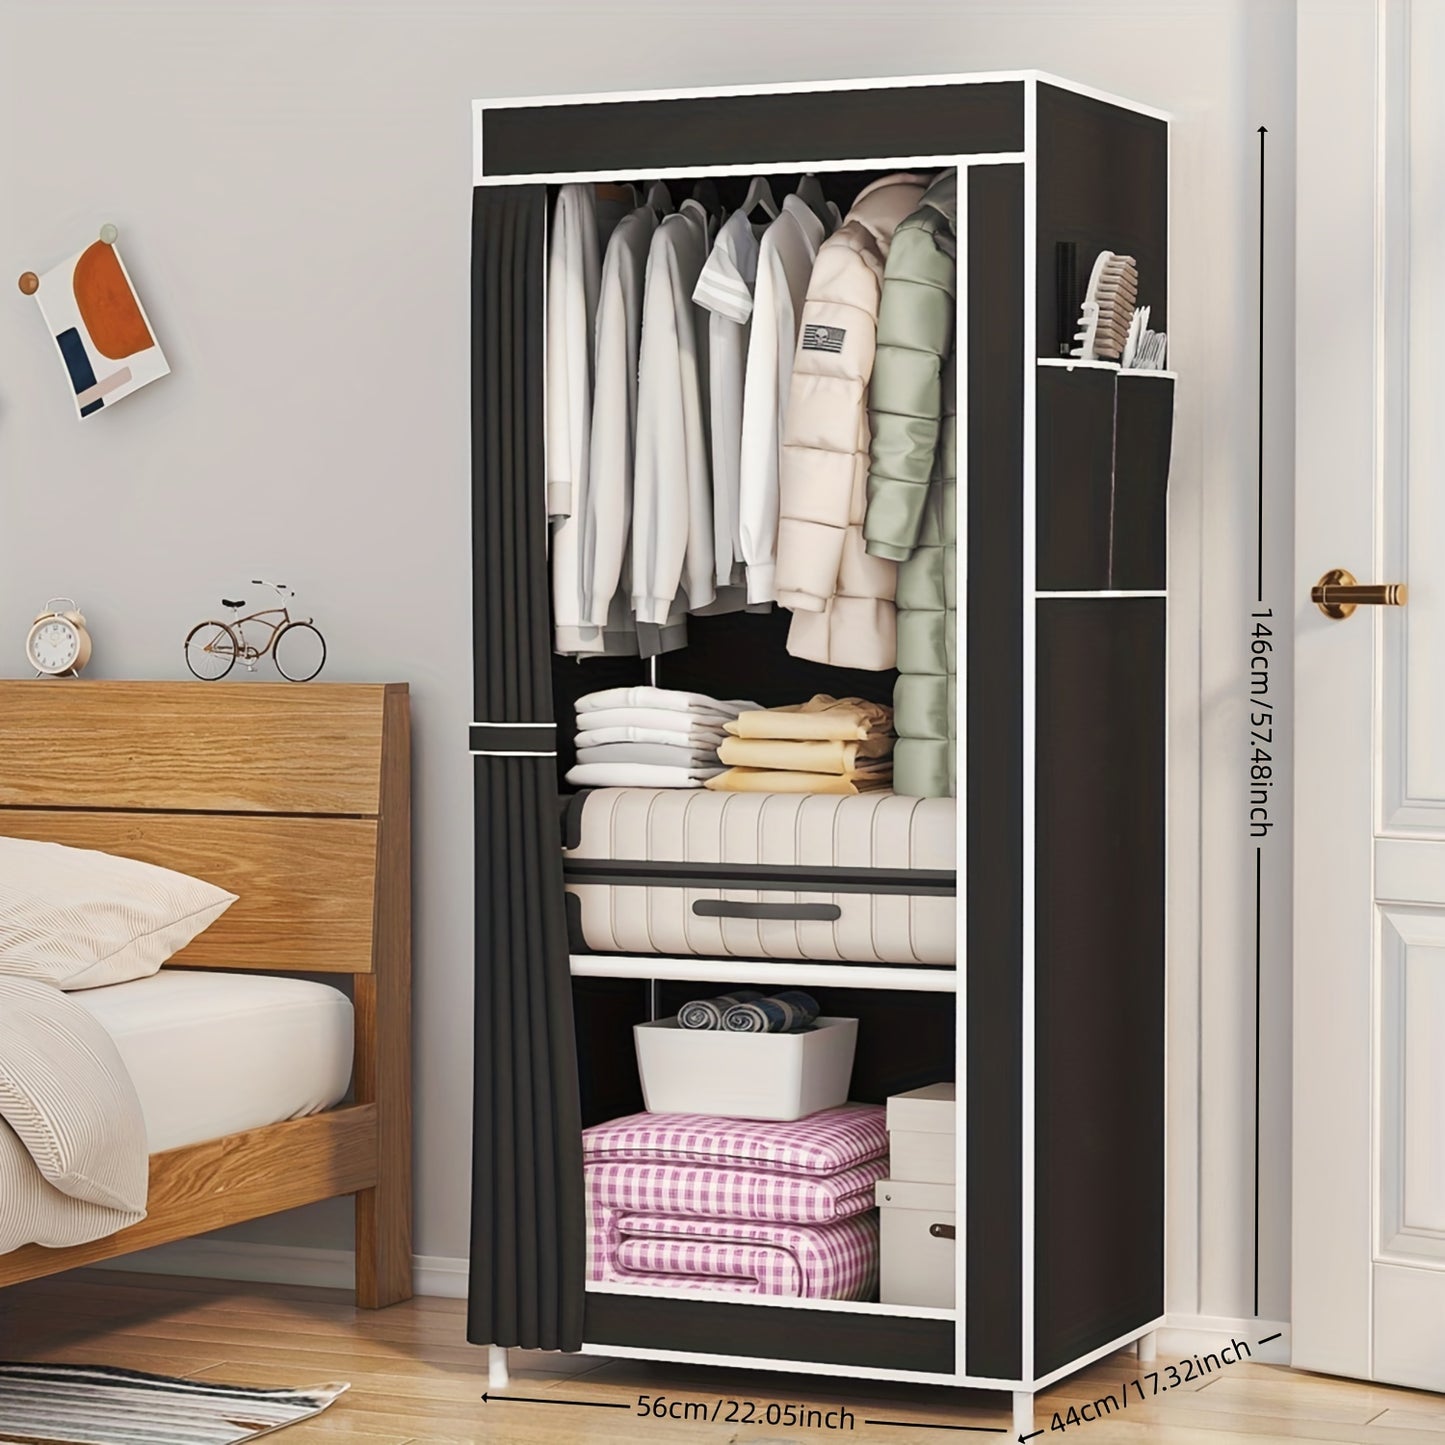 1pc 2-layer Clothes Storage Wardrobe With Dustproof Cover, Durable Clothes Storage Rack, Household Storage Organizer For Cabinet, Rental House, Bedroom, Home, Dorm, Entryway, Essential Bedroom Furniture